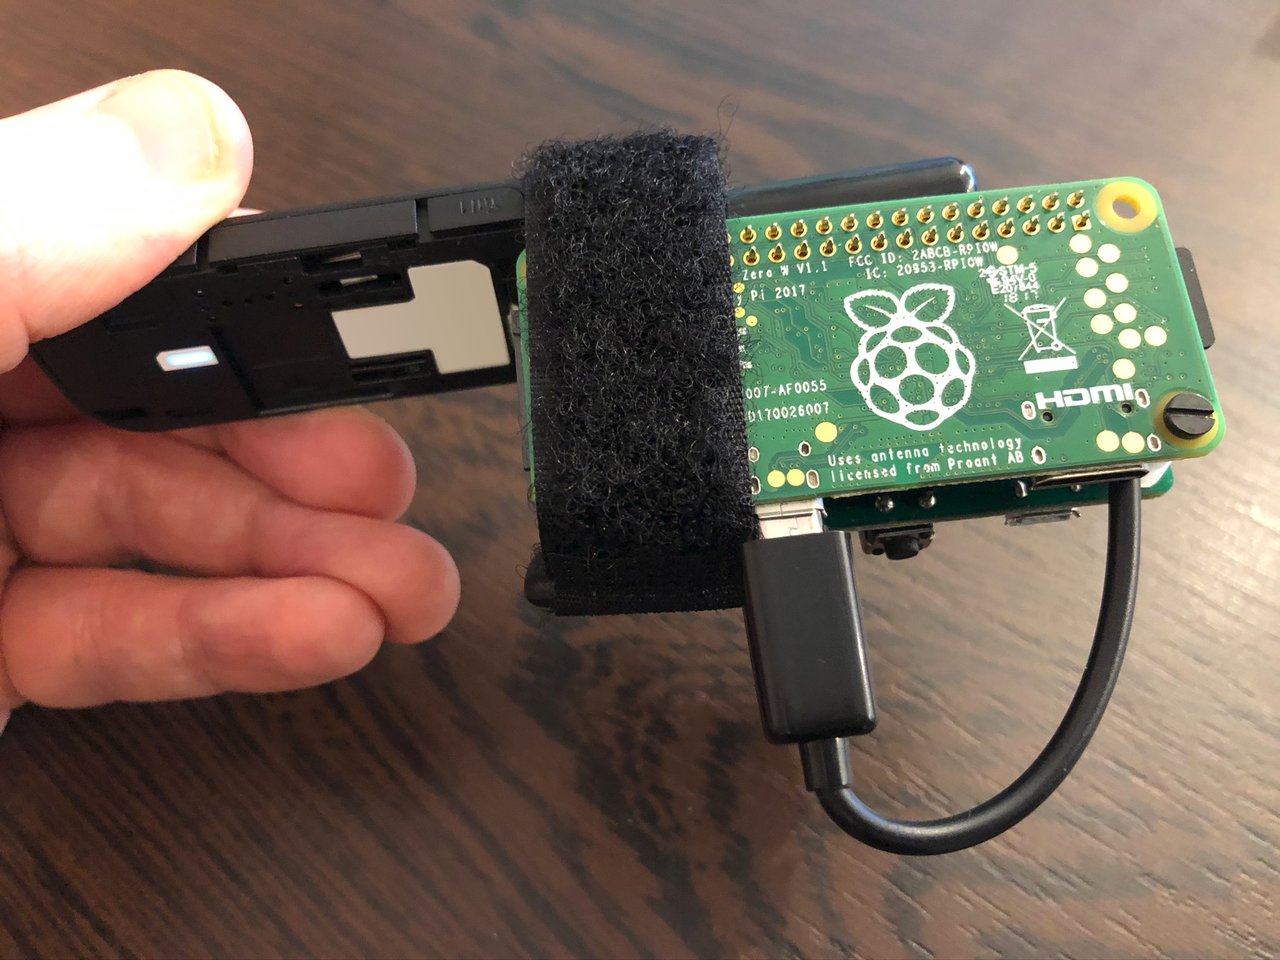 Photo of Prototype-01 bound with the velcro strap and in my hand showing the back of the Raspberry Pi with the raspberry logo.